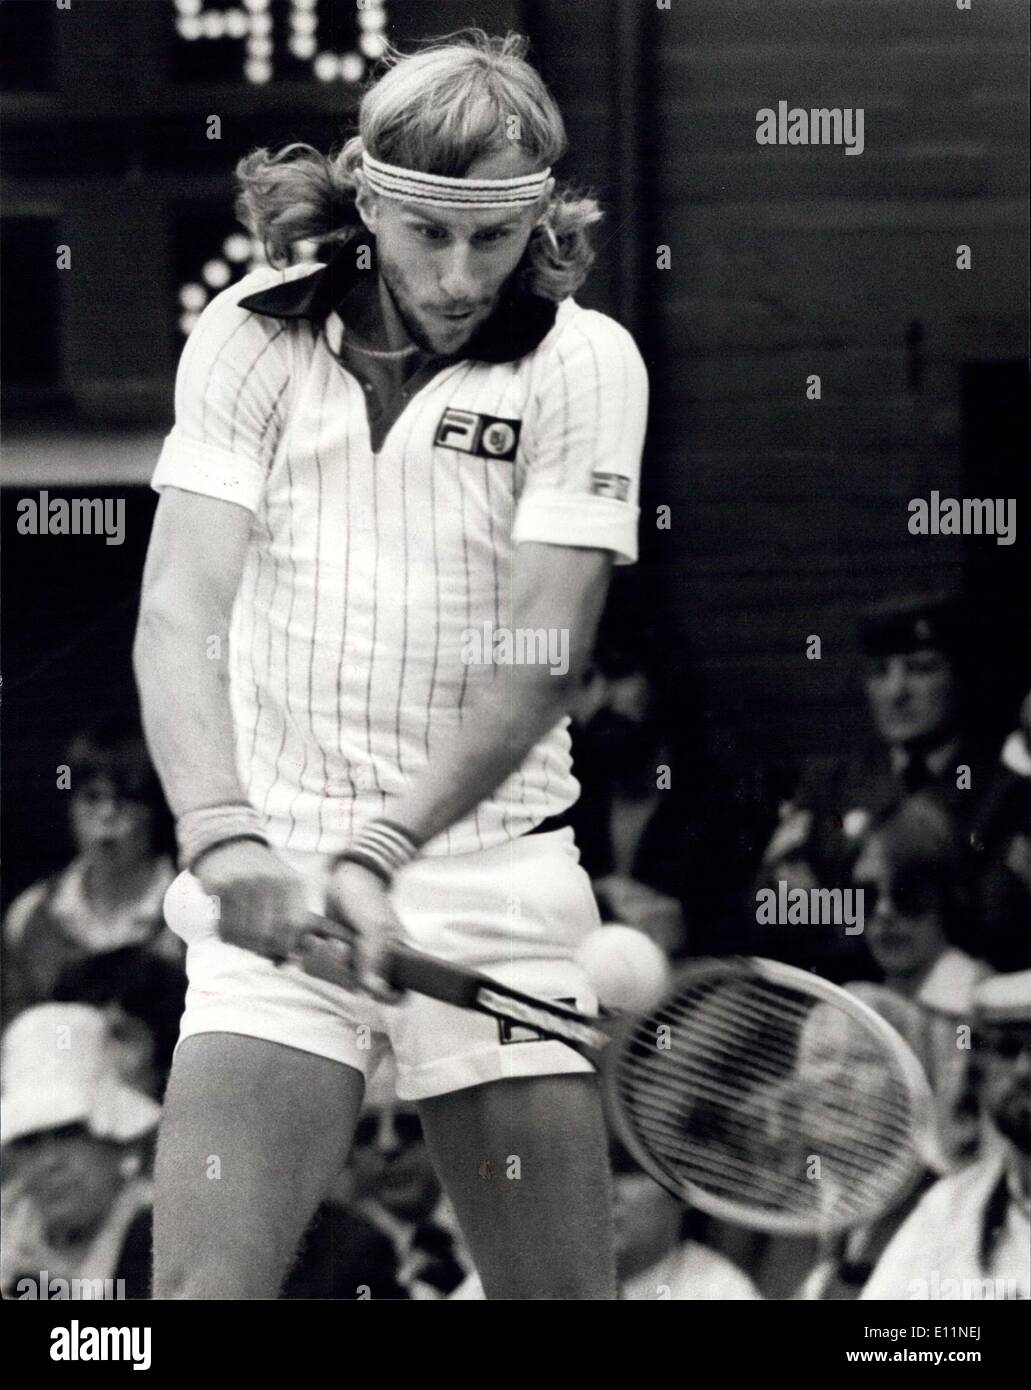 Jul. 07, 1979 - BJORN BORG WINS HIS FOURTH SECCESSIVE WIMBLEDON TITLE BEATING ROSCOE TANNER IN FIVE SETS. Today of the Centre Court at Wimbledon BJORN BORG of Sweden won the Men's Singles title for the fourth Seccessive time when he beat the American ROSCOE TANNER in five sets. PHOTO SHOWS: BJORN BORG seen in action against Roscoe tanner on the centre court. Stock Photo